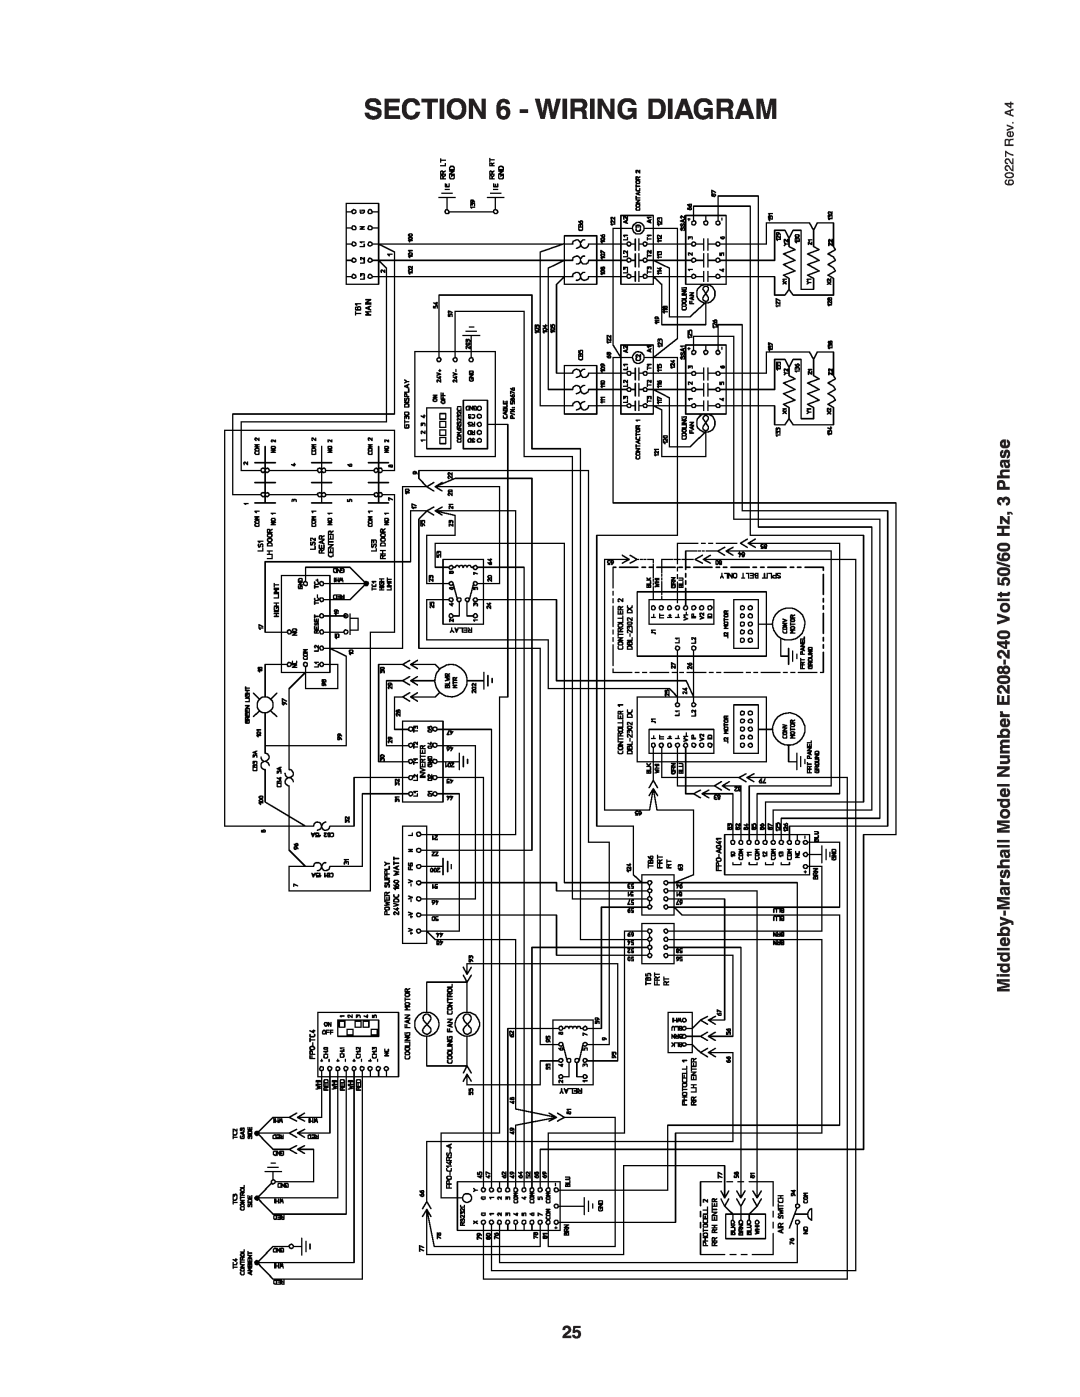 Middleby Marshall PS640E installation manual Wiring Diagram, Middleby-Marshall Model Number E208-240 Volt 50/60 Hz, 3 Phase 